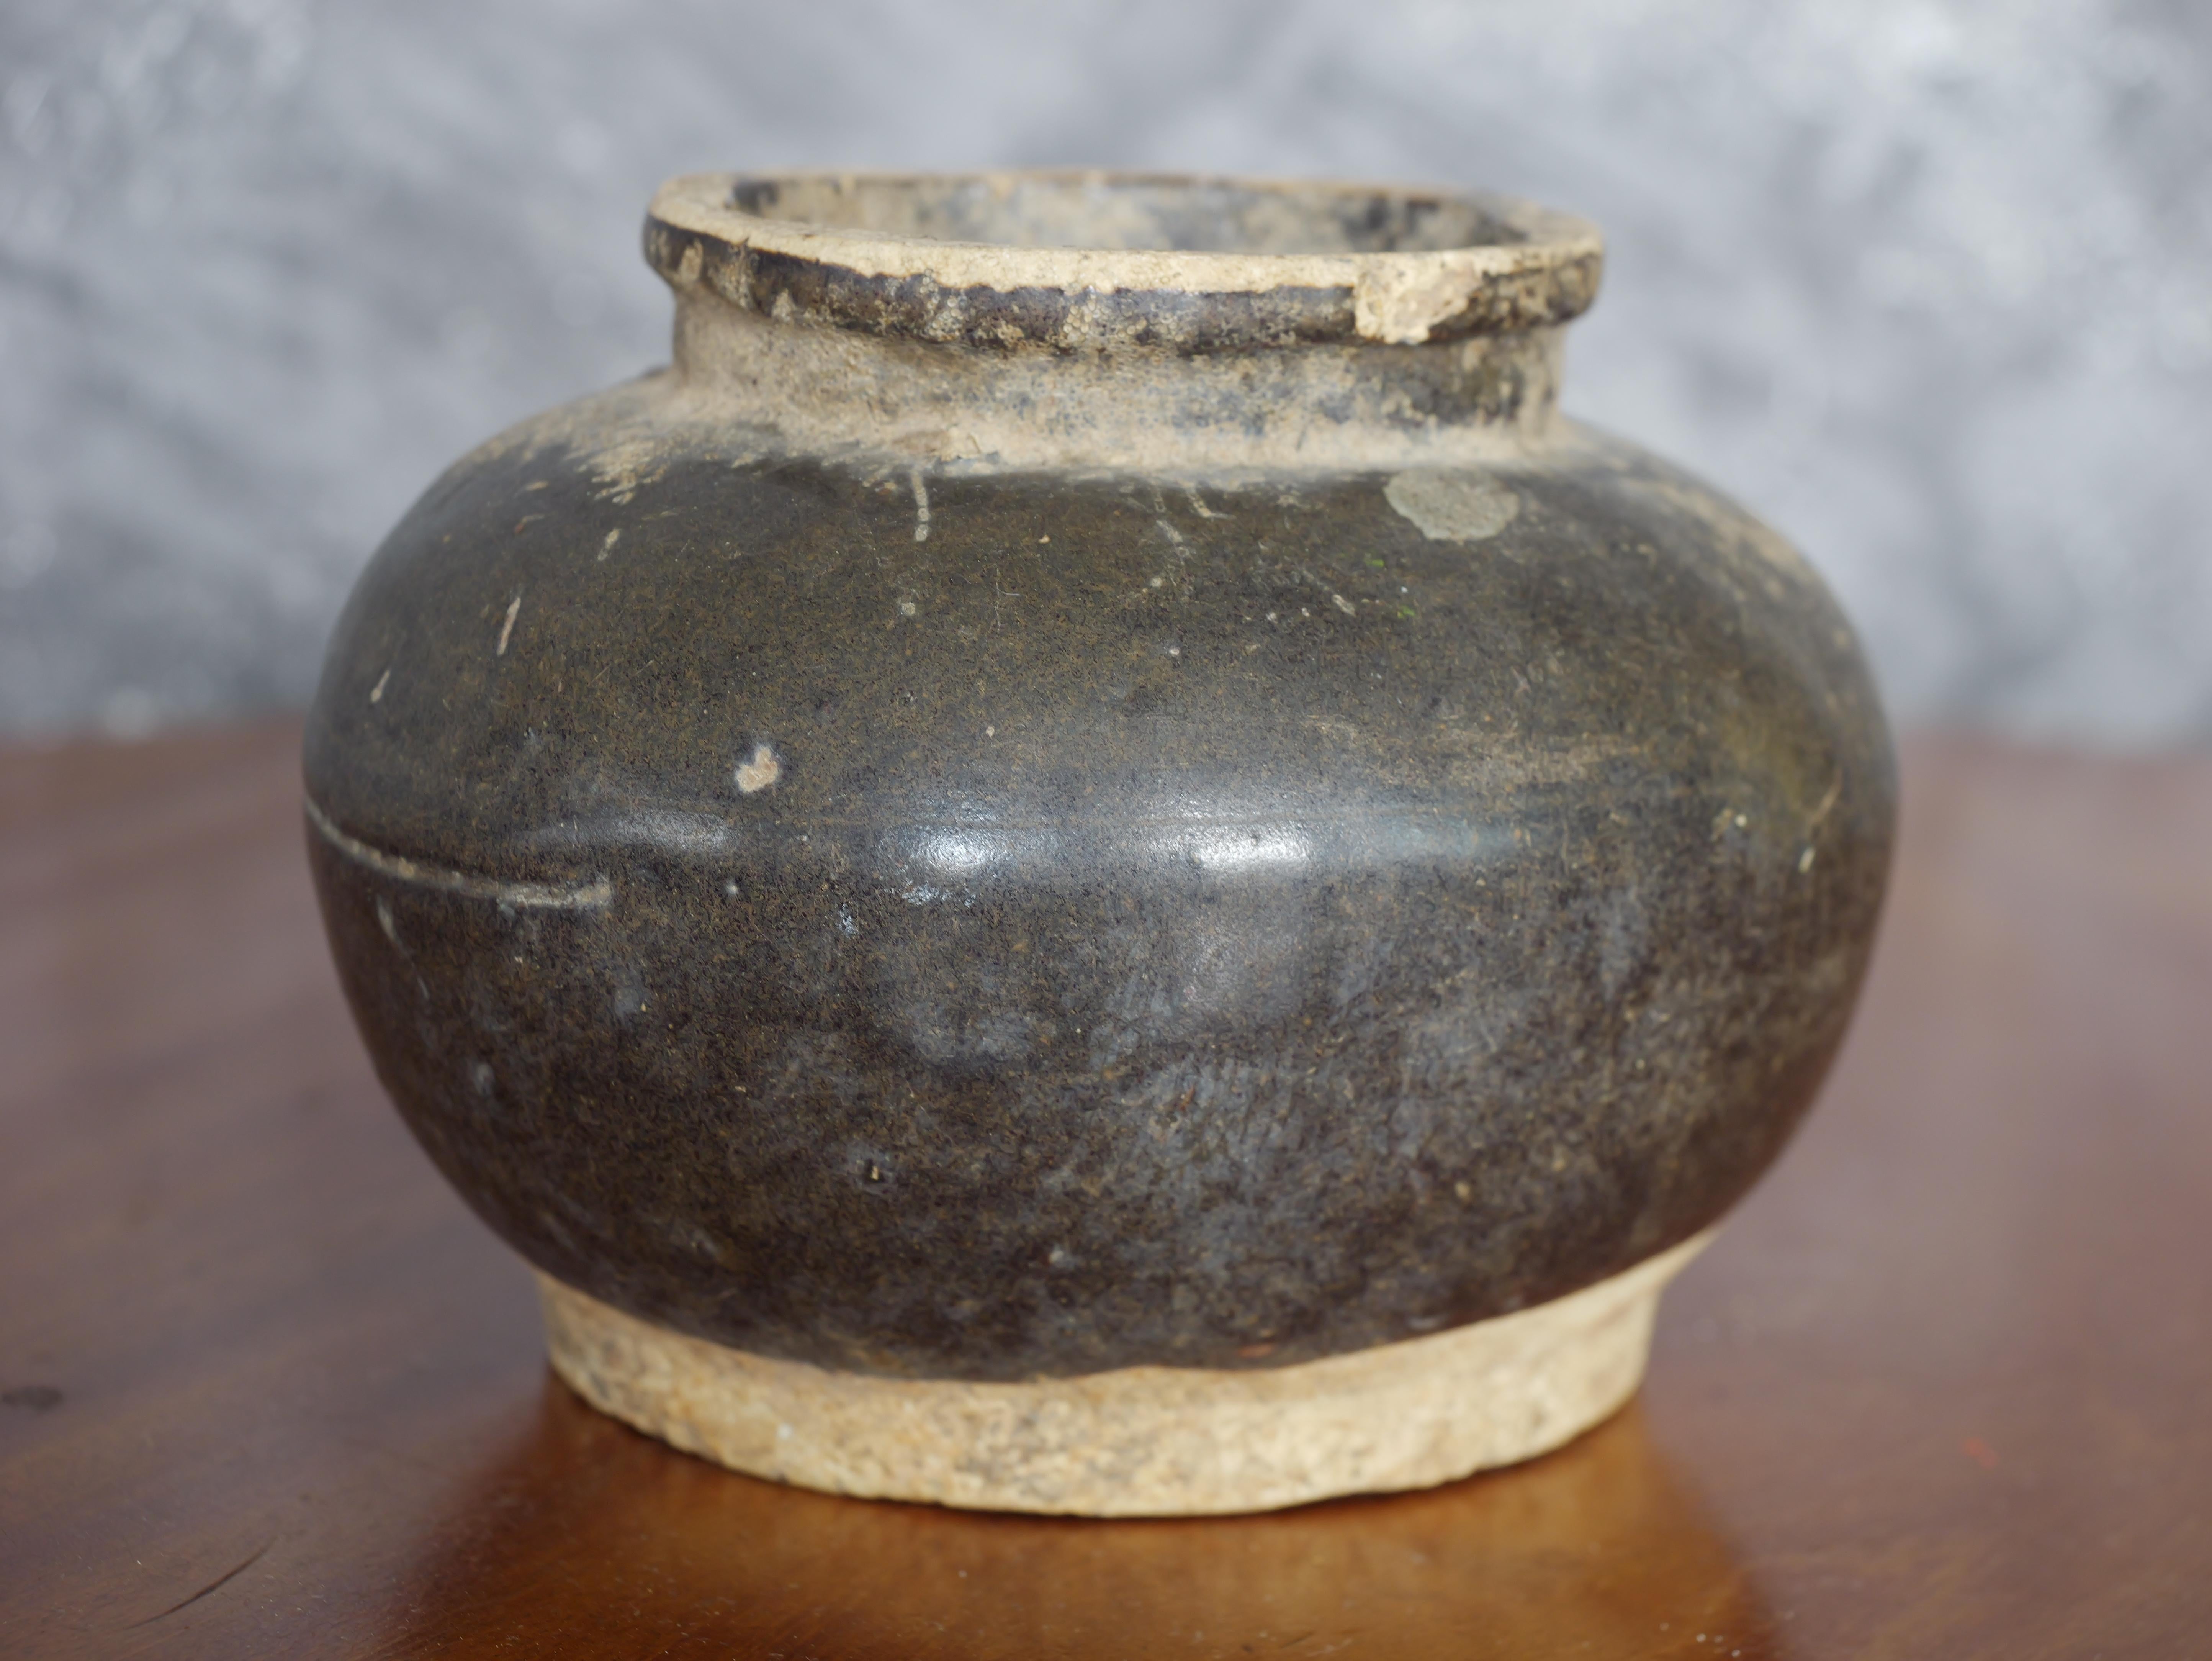 This Chinese Brown Glazed Earthenware Jar from the Song dynasty is a remarkable piece despite its age and slight damage. The jar features a rich brown glaze that is typical of Song dynasty ceramics, known for their simplicity and elegance.

Although